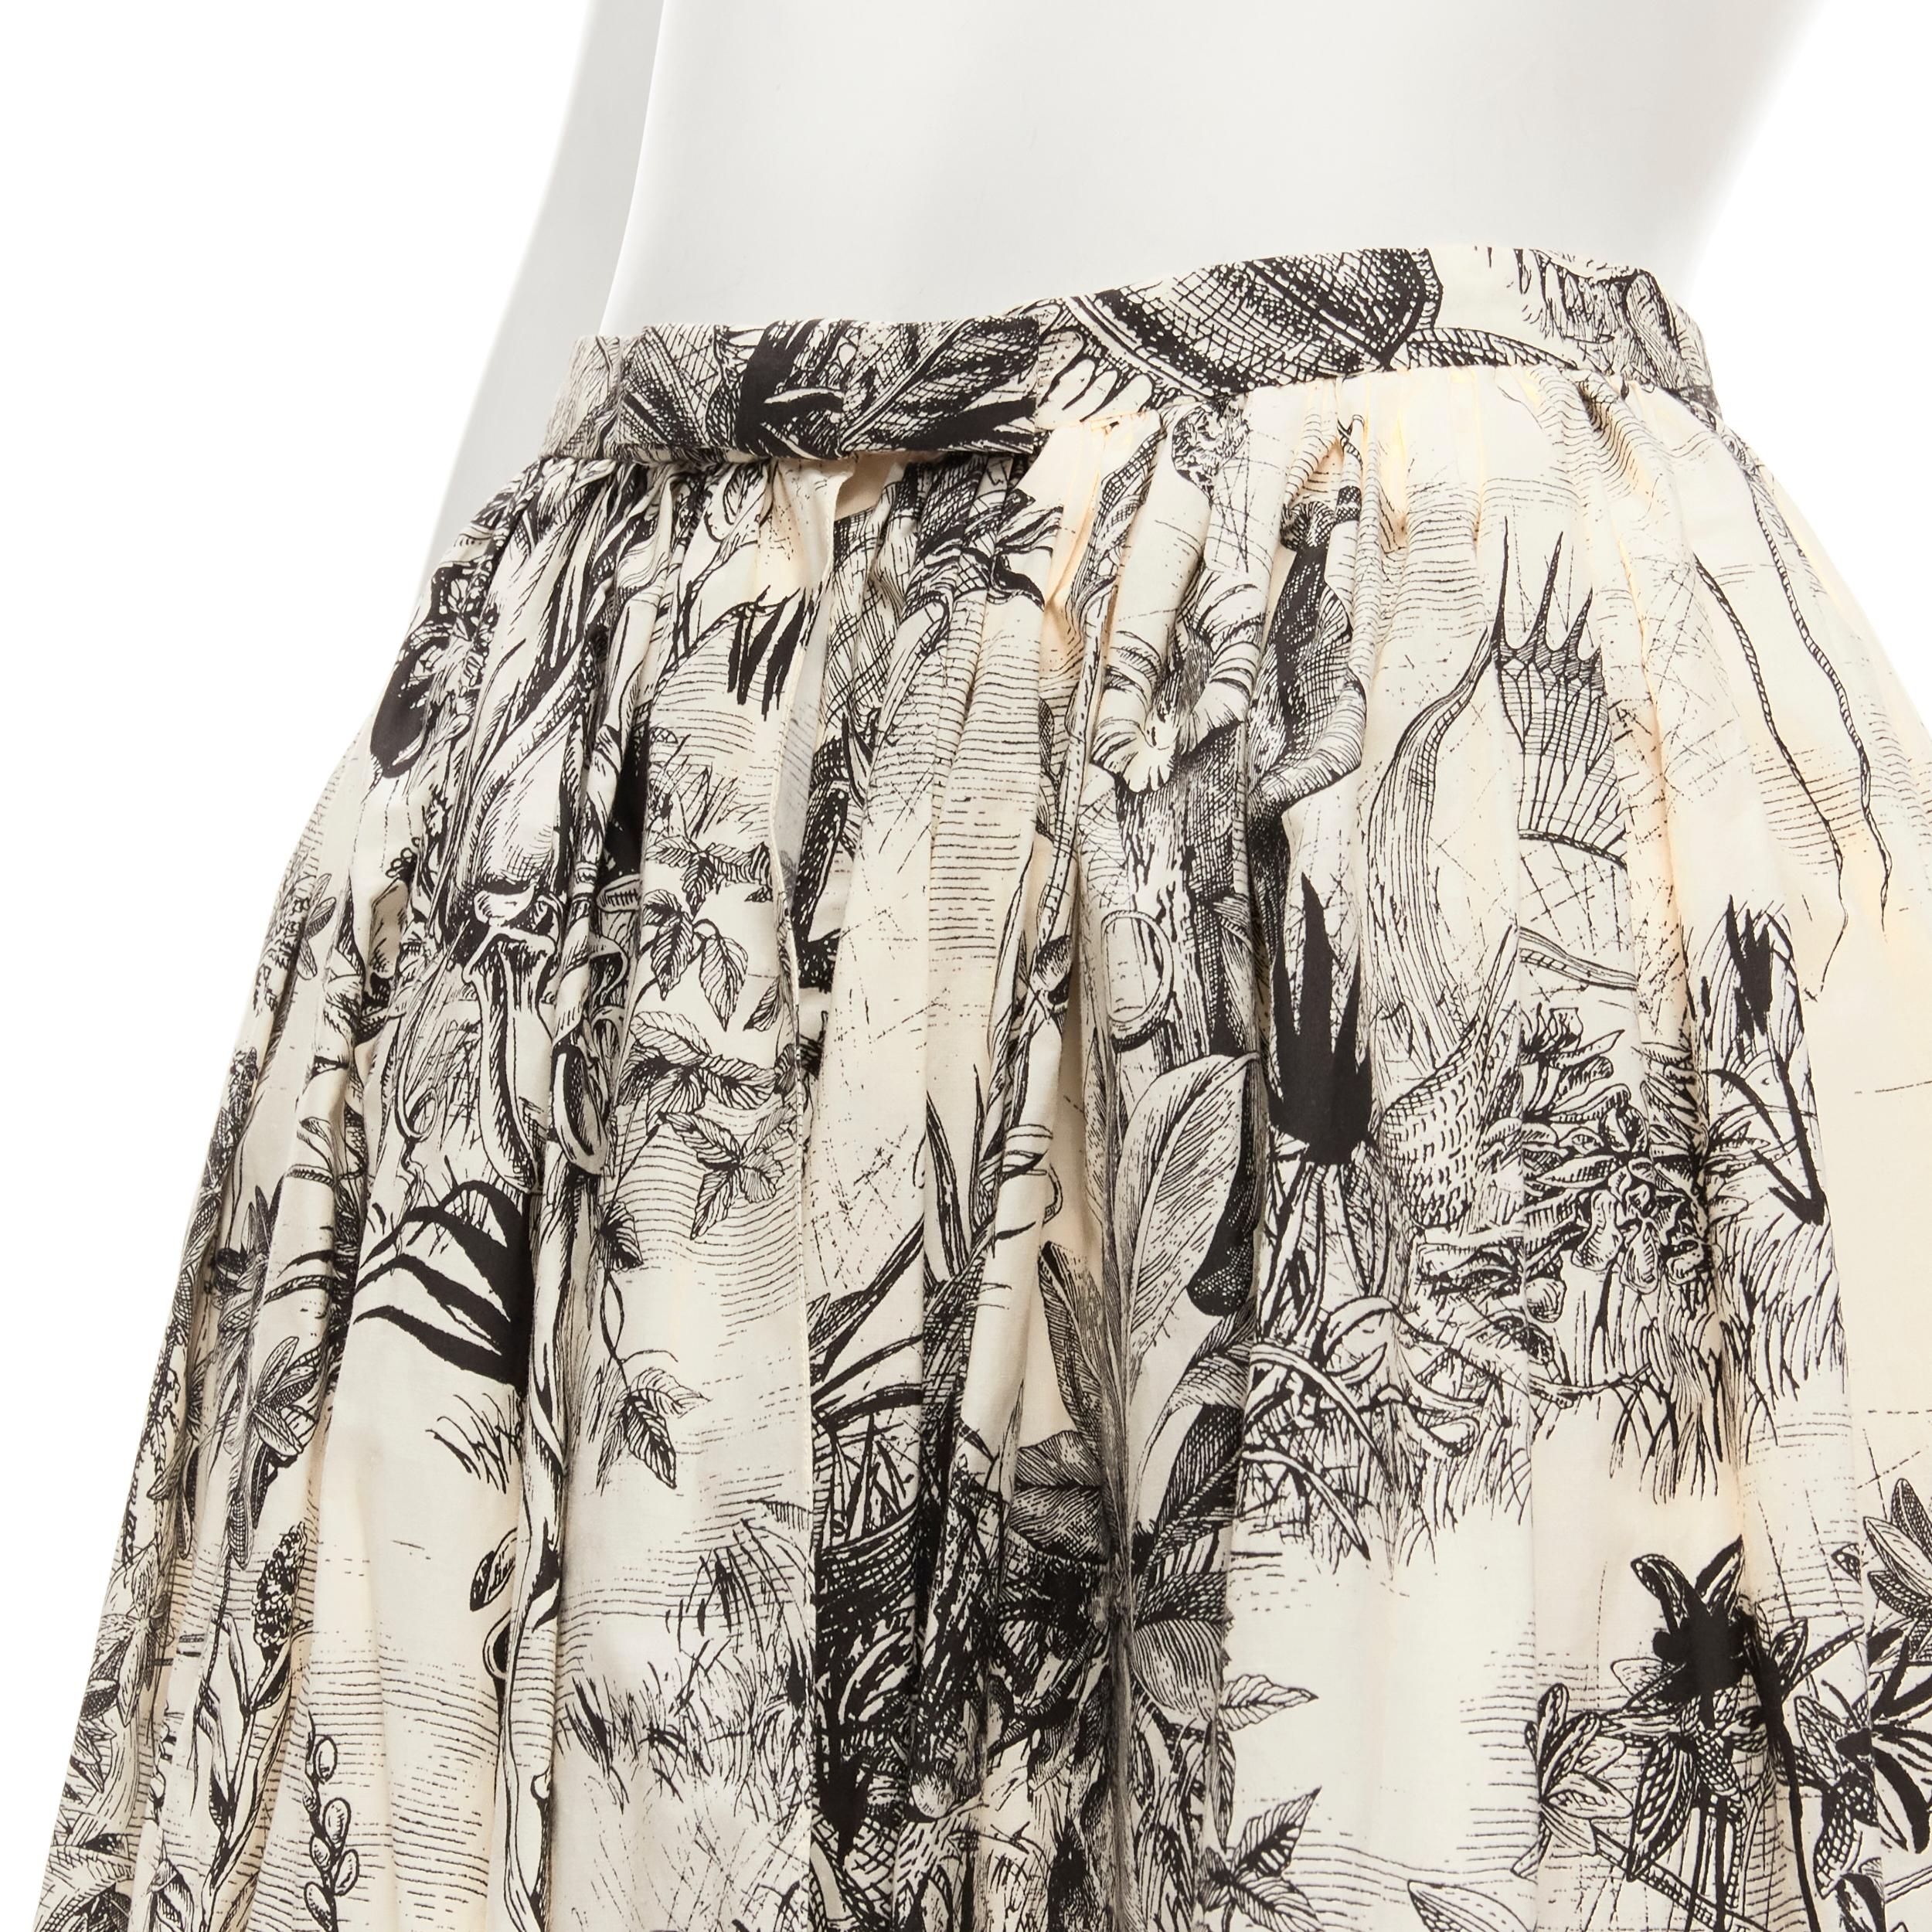 CHRISTIAN DIOR Fantaisie beige illustration print cotton midi skirt FR34 XS
Brand: Christian Dior
Designer: Maria Grazia Chiuri
Material: Cotton
Color: Beige
Pattern: Abstract
Closure: Hook & Eye
Extra Detail: Bow detail at front waist. Open front